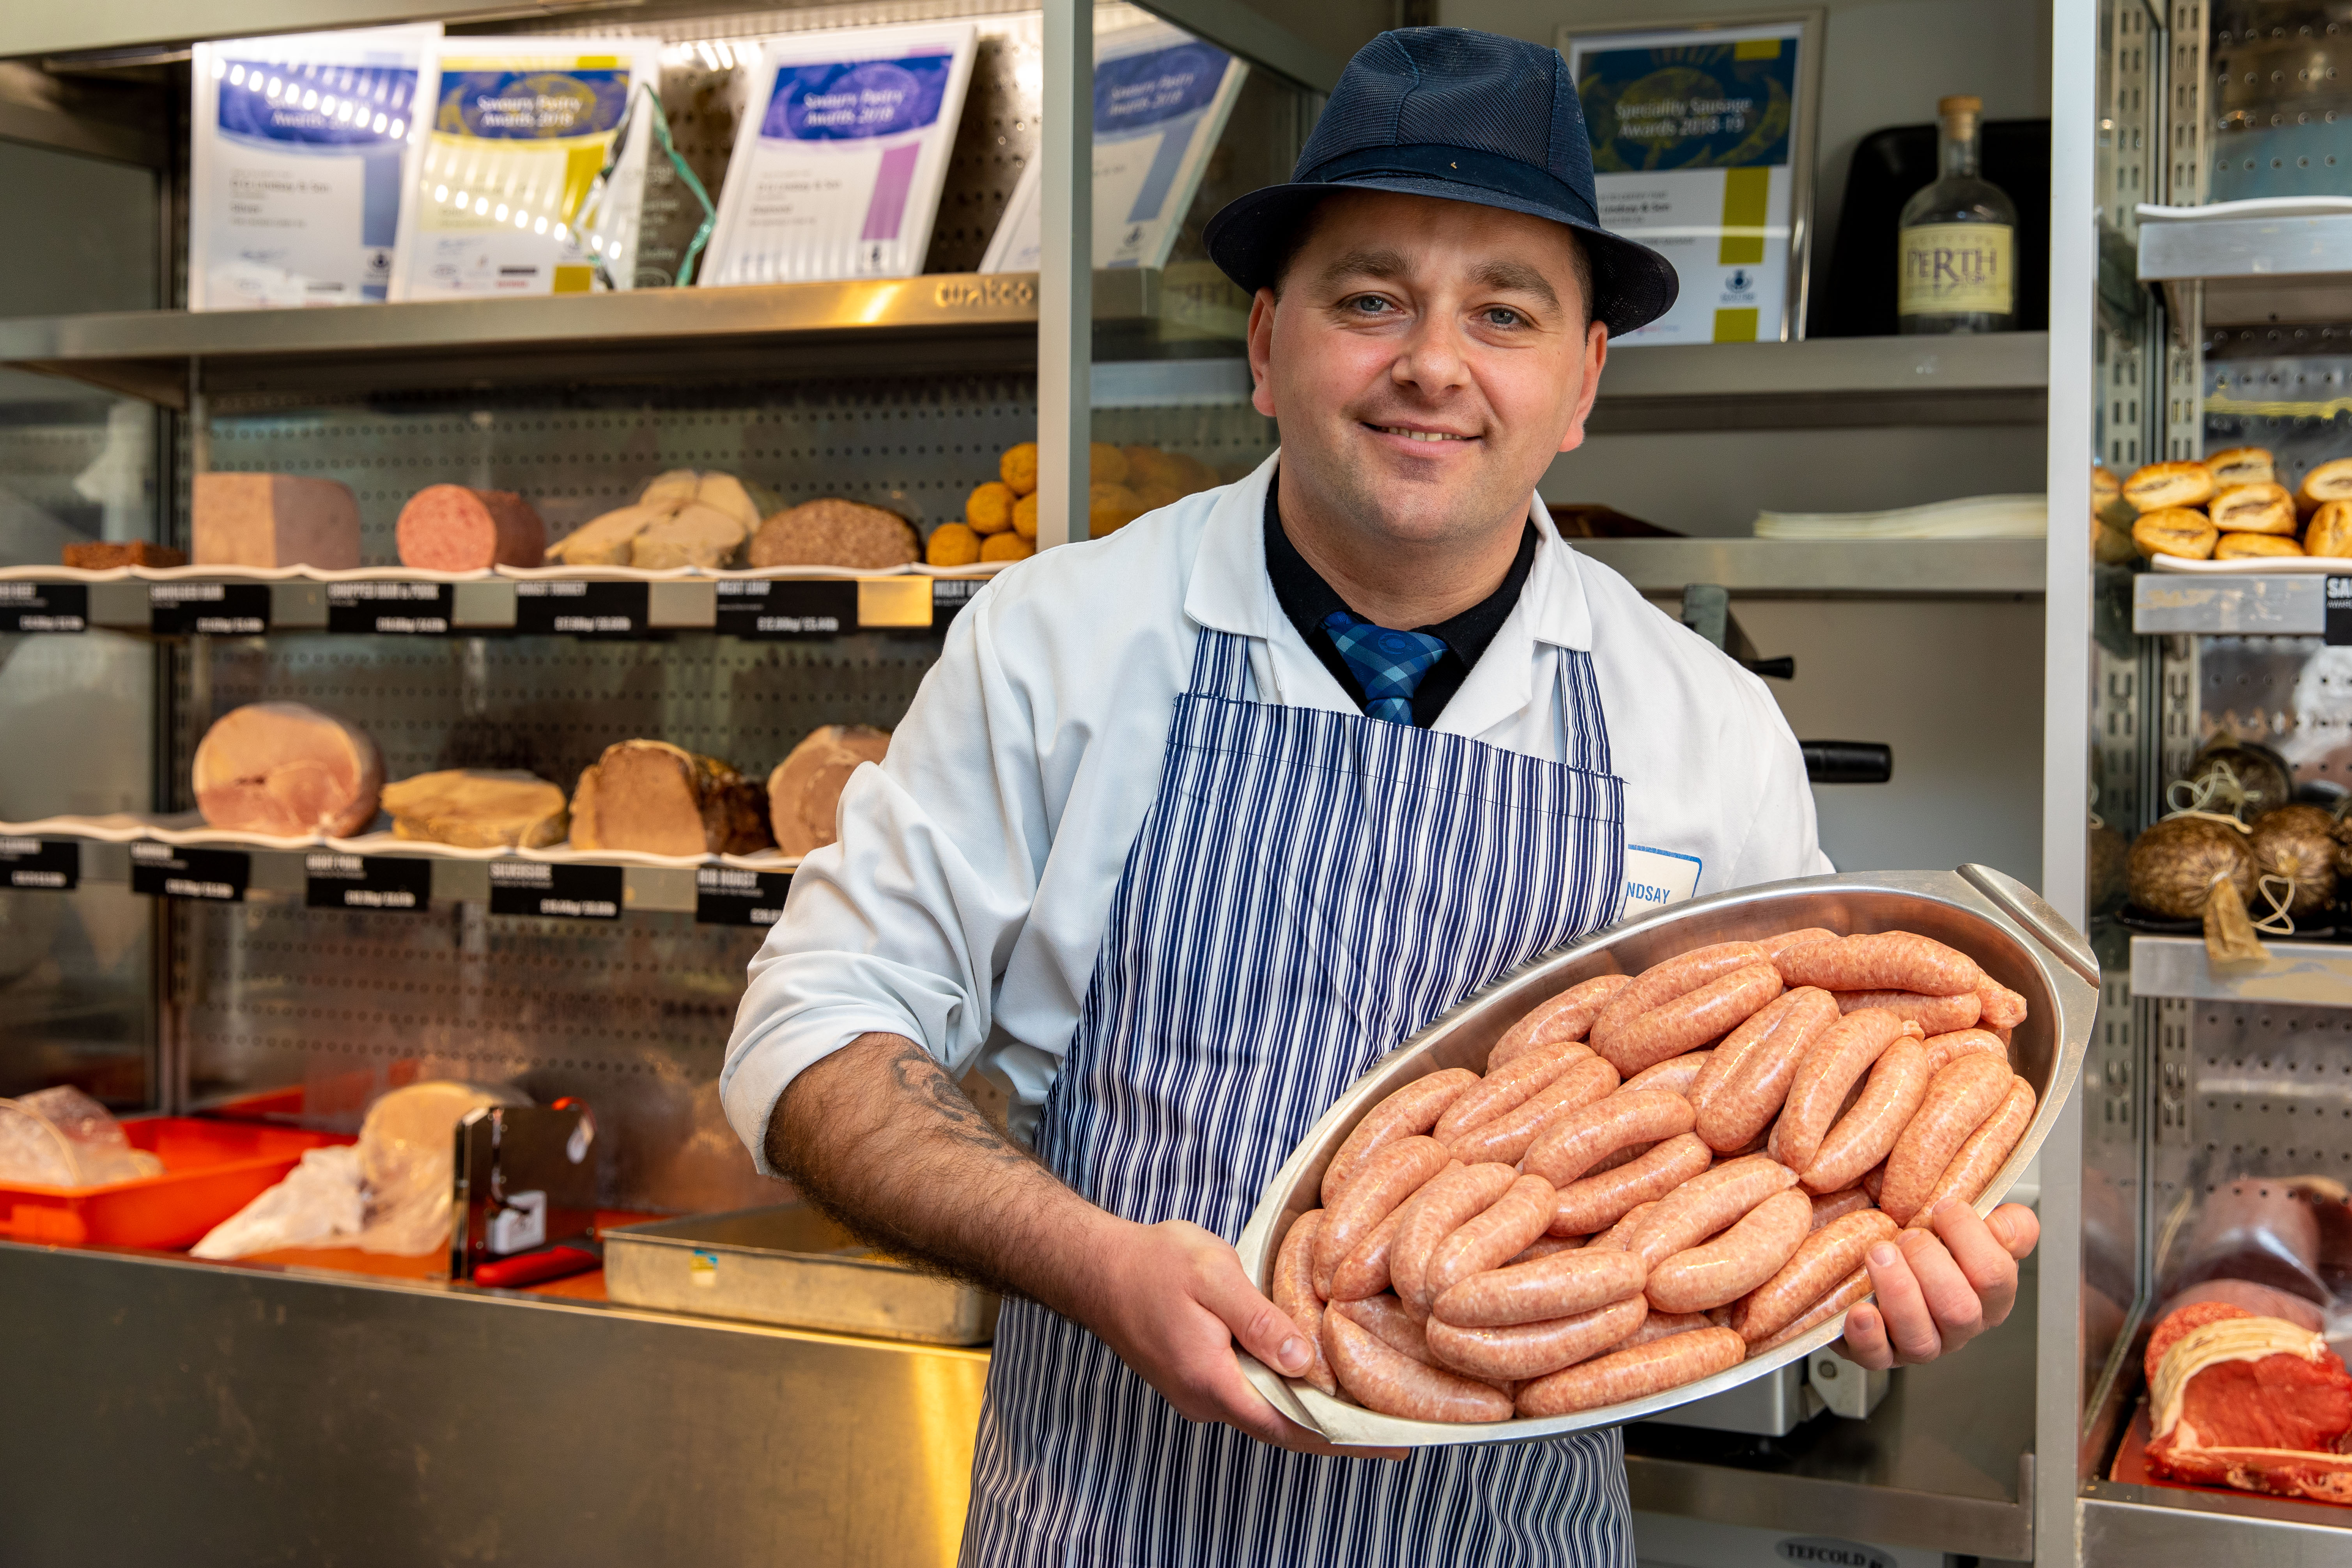 Rafal Wichrowski narrowly missed breaking the world record for linking the most sausages in under a minute.